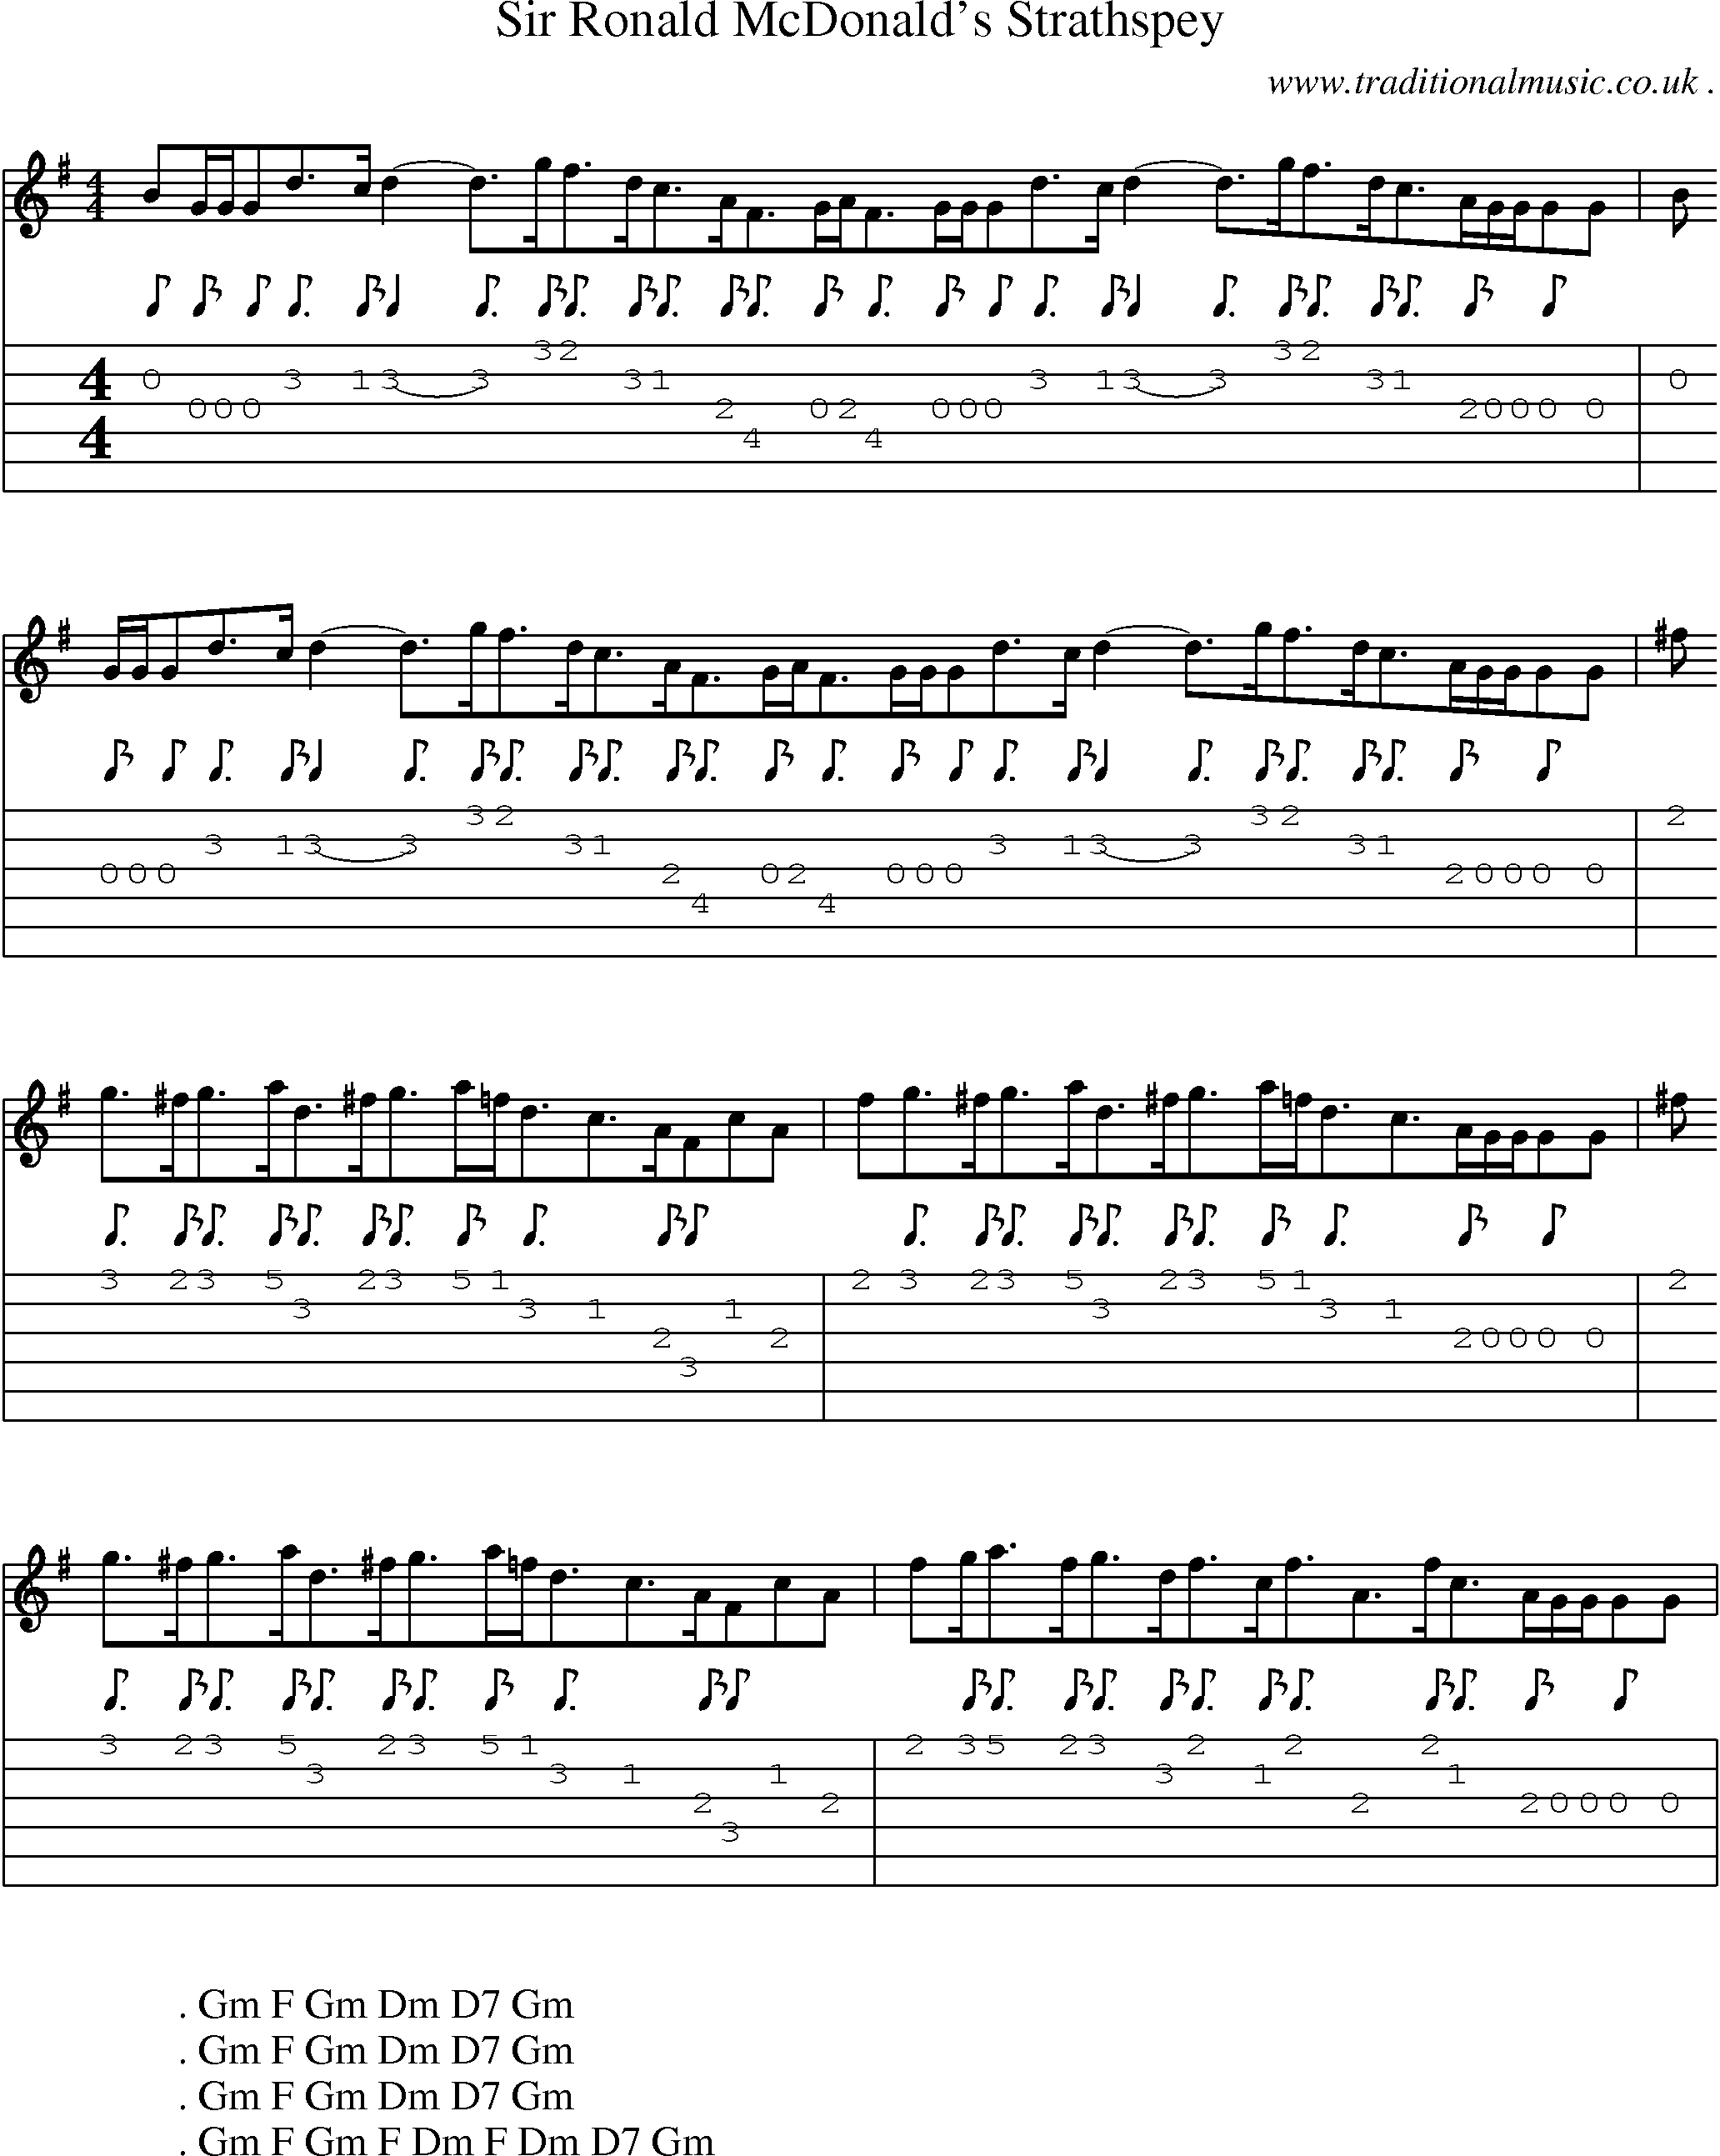 Sheet-music  score, Chords and Guitar Tabs for Sir Ronald Mcdonalds Strathspey